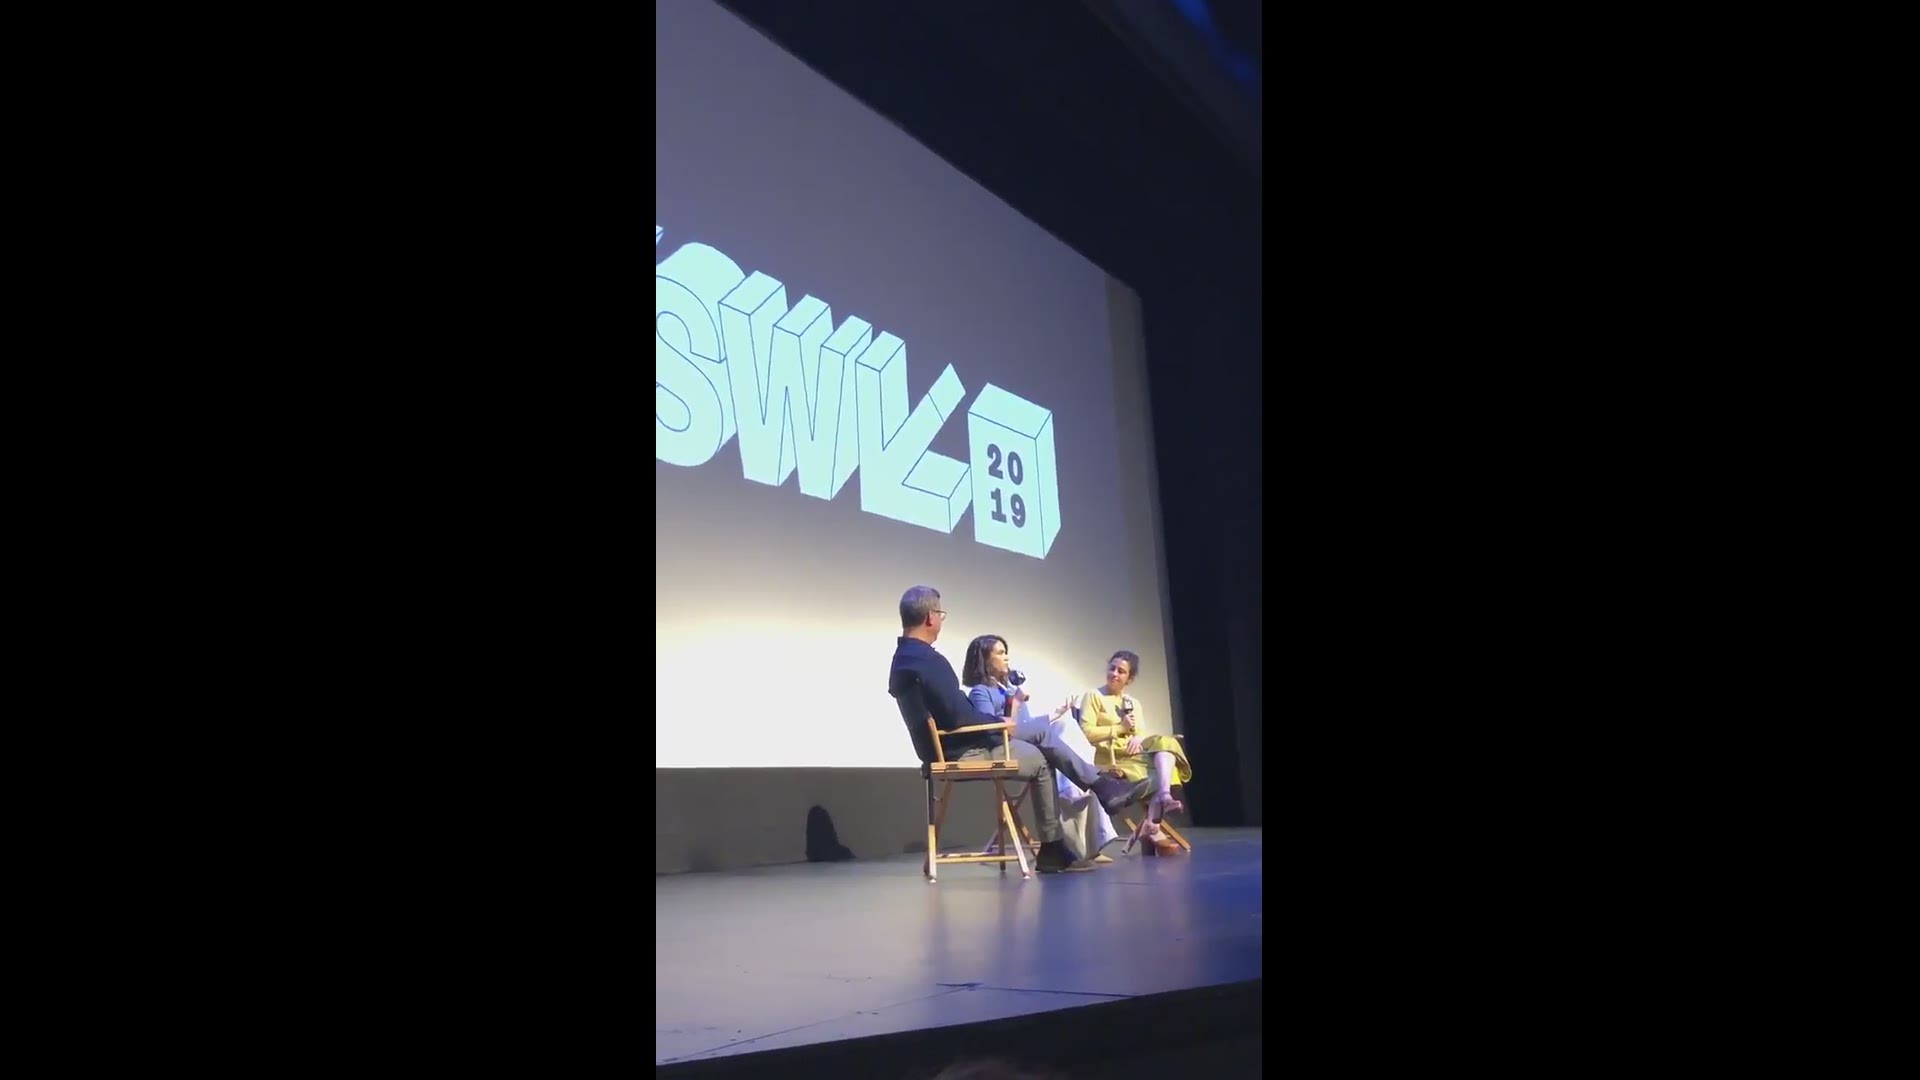 The final three episodes of the "Broad City" premiered at SXSW 2019 with a Q&A from the show's creators, Abbi Jacobson and Ilana Glazer.